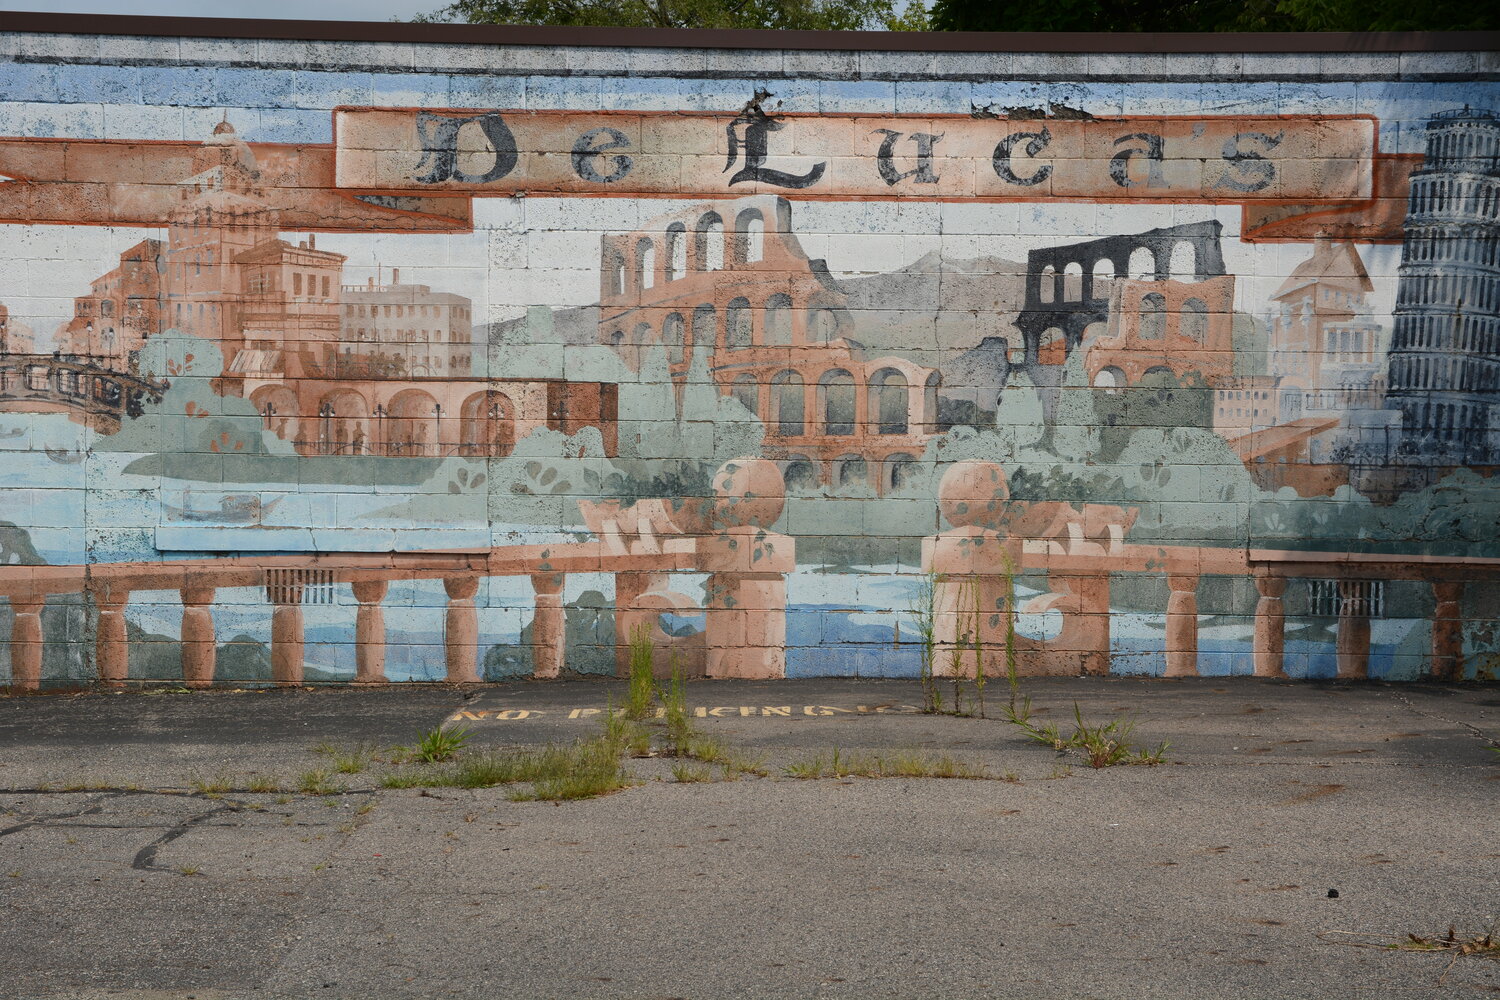 A 14-by-38-foot Gary Glenn mural at the old DeLuca’s restaurant on Willow Street.